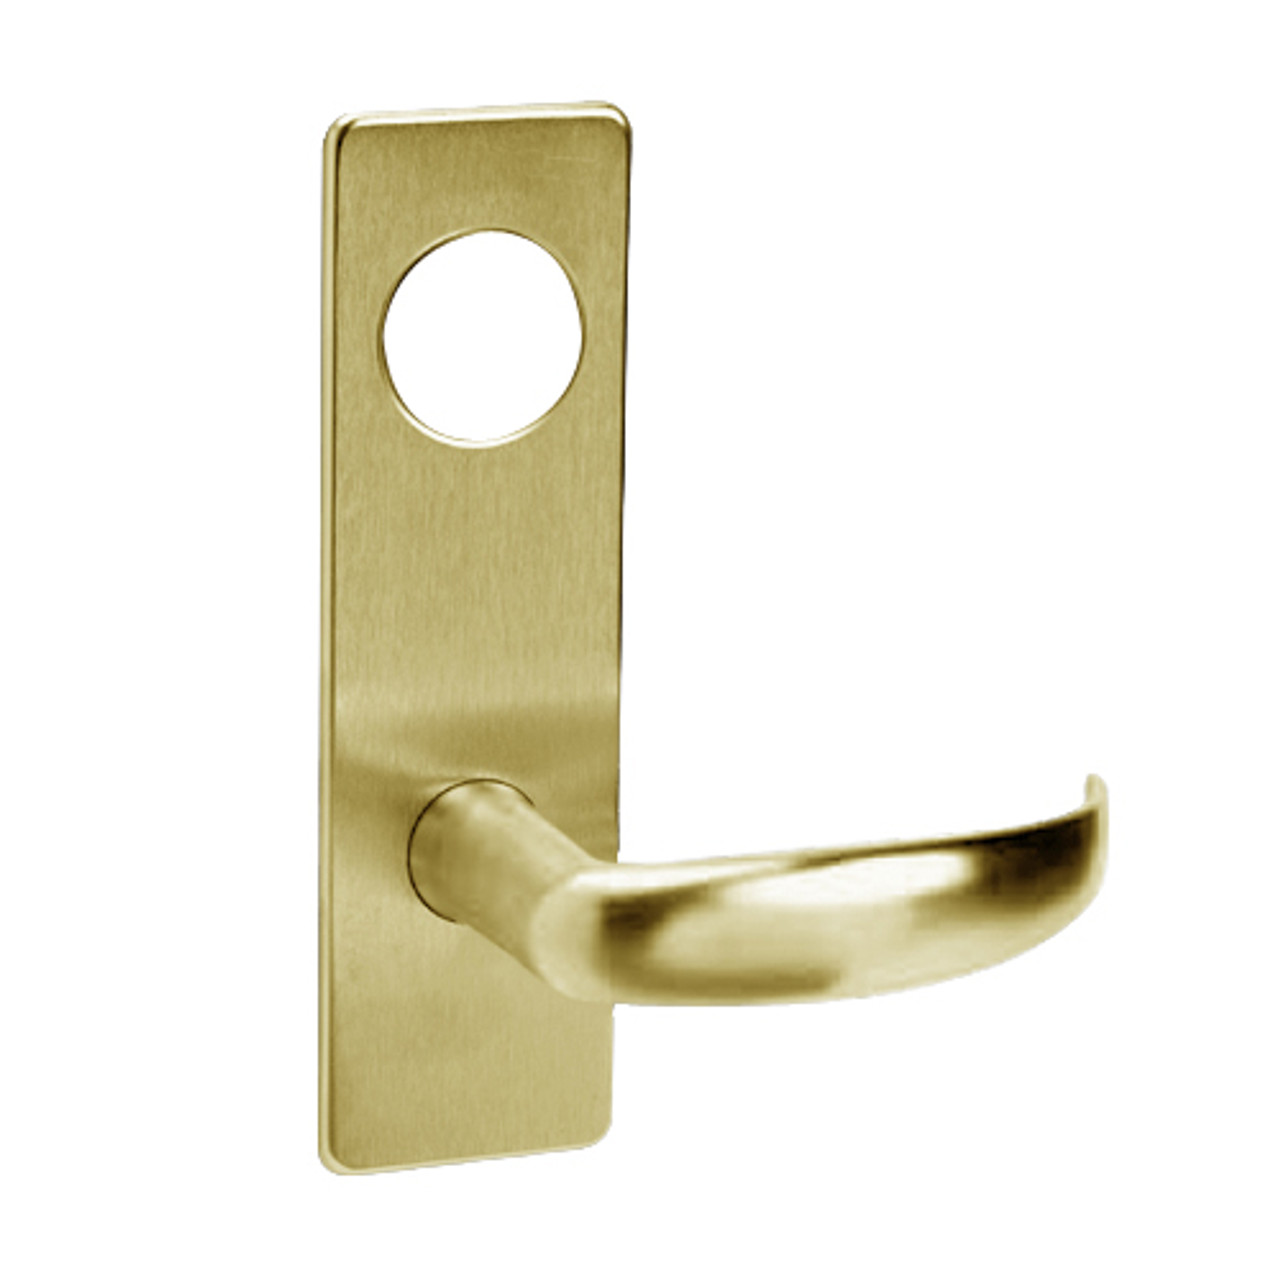 ML2024-PSR-606-LC Corbin Russwin ML2000 Series Mortise Entrance Locksets with Princeton Lever in Satin Brass